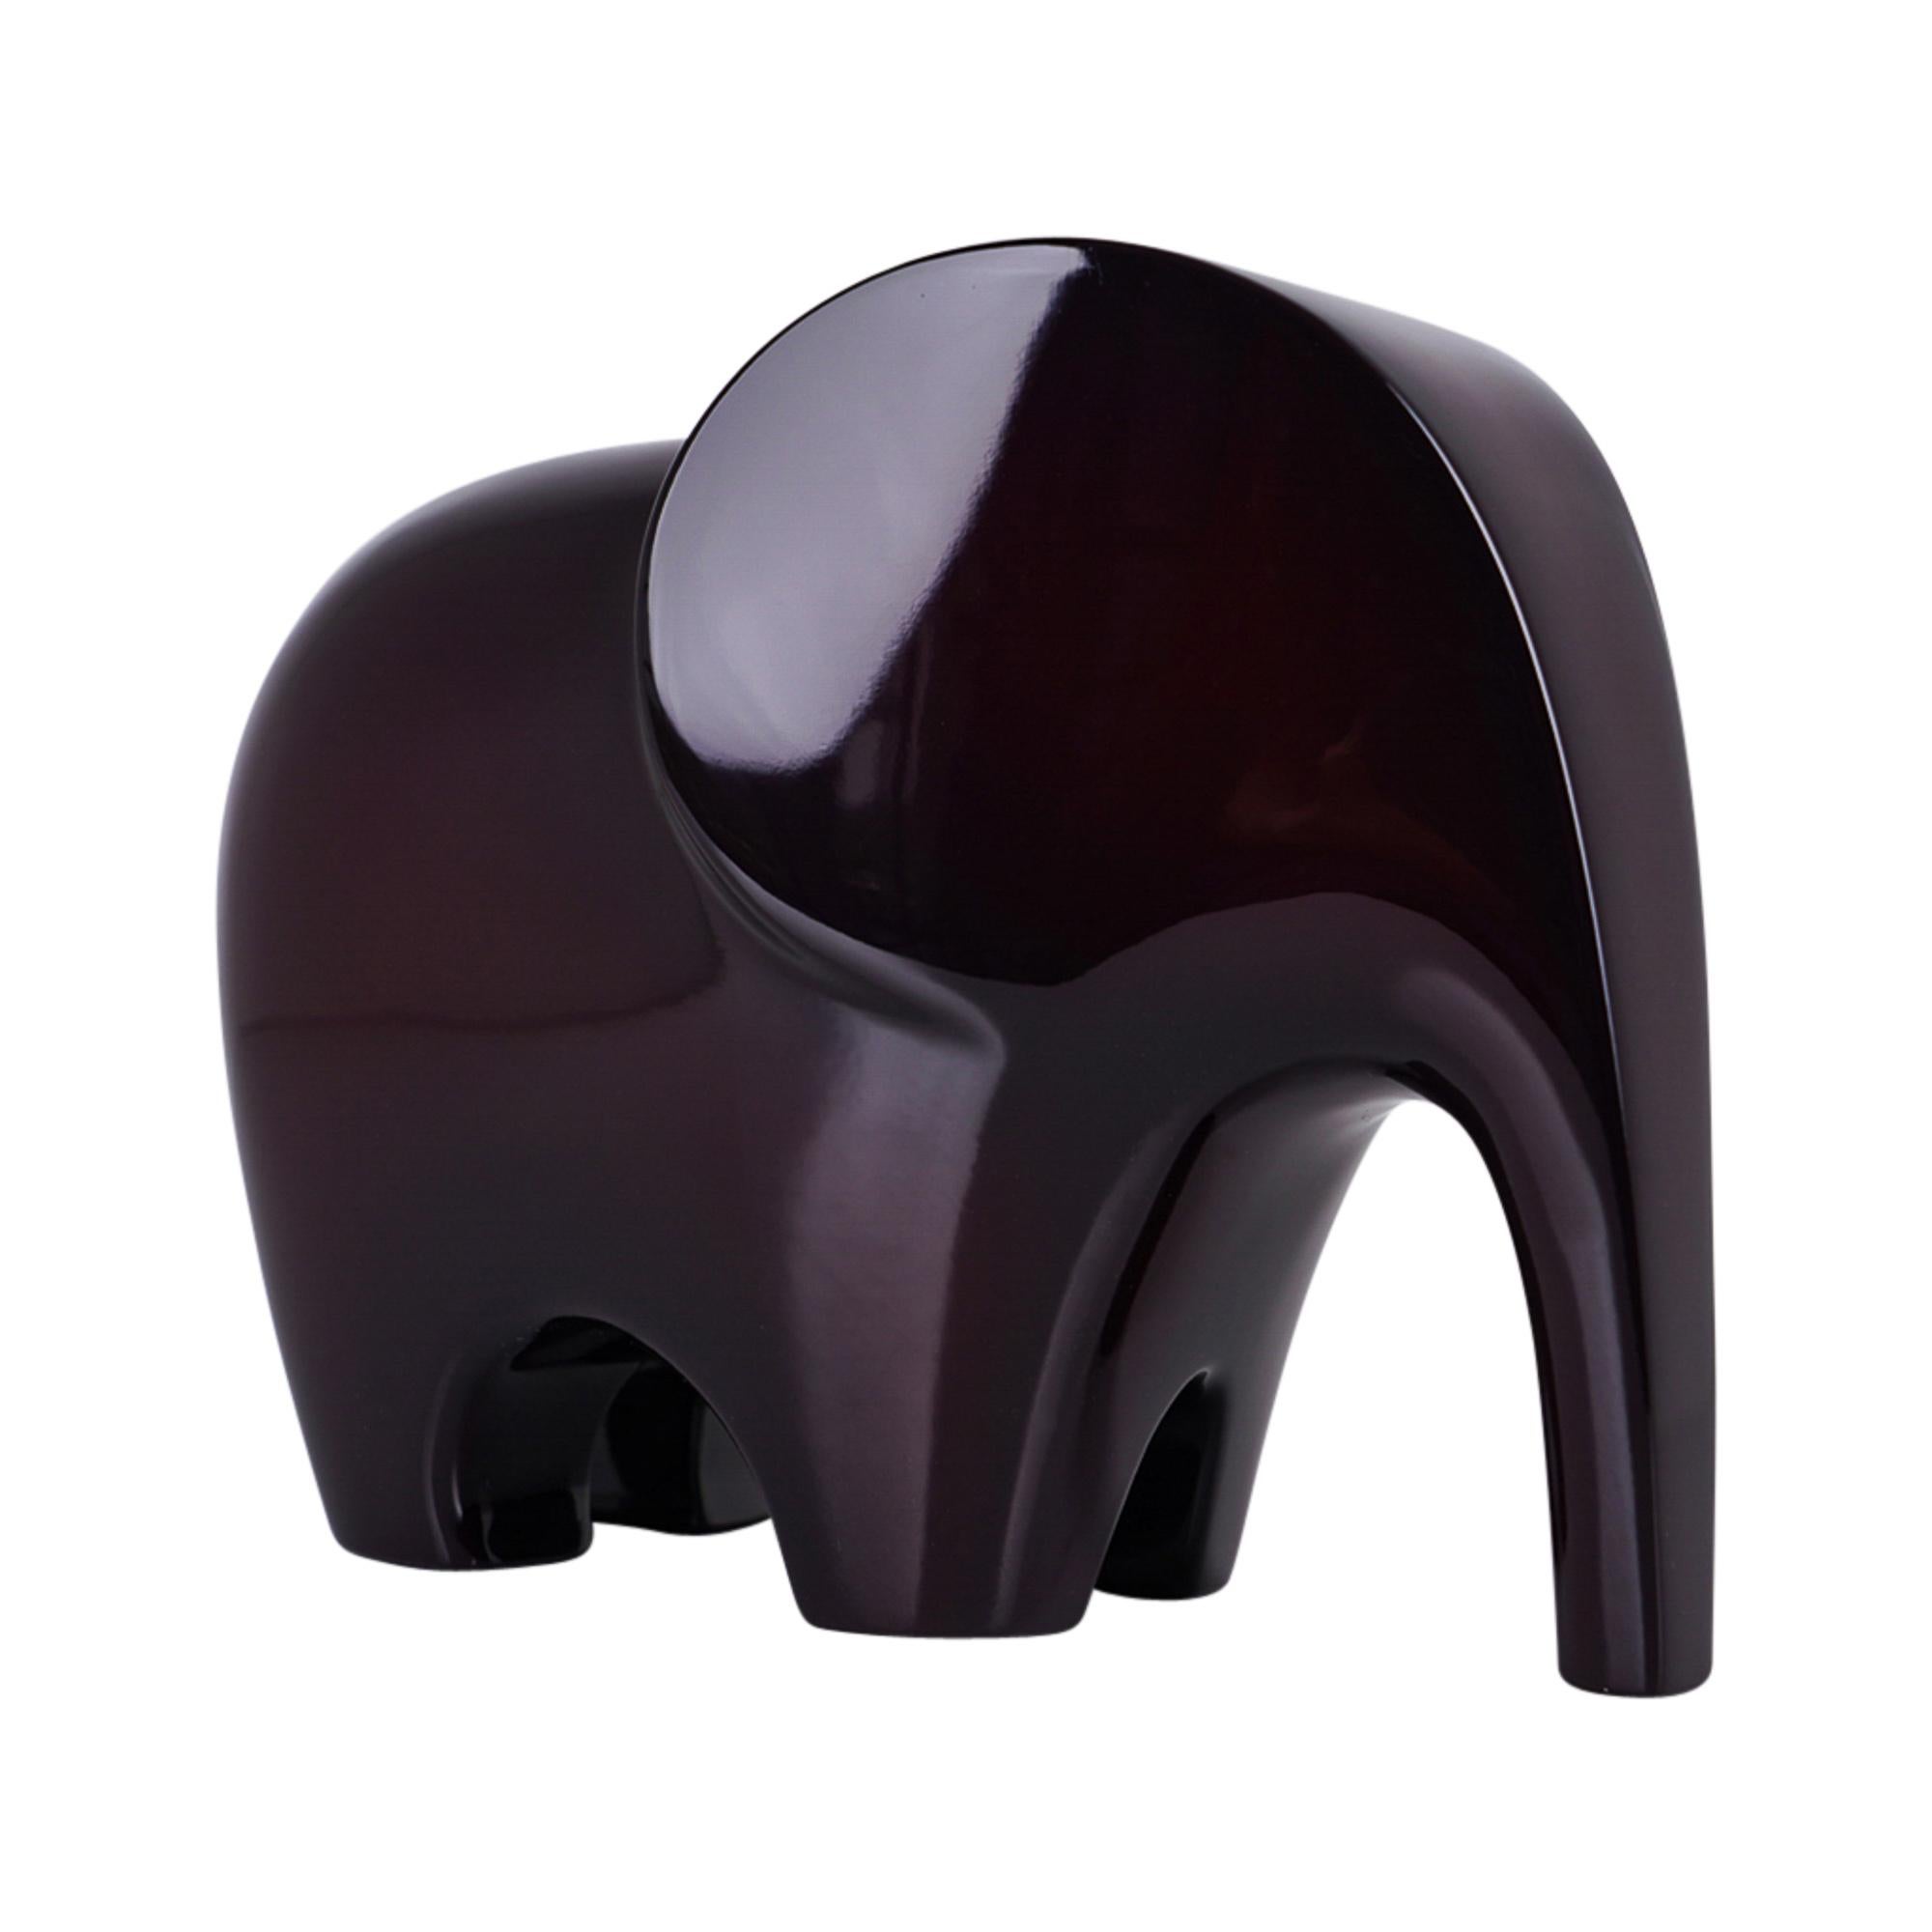 Mightychic offers a guaranteed authentic Hermes Lao Elephant paperweight featured in Aubergine hand lacquered wood.
Sold out and very difficult to find new.
A perfect accent piece for any room.
Wonderful for desk or gifting.
Accompanied with